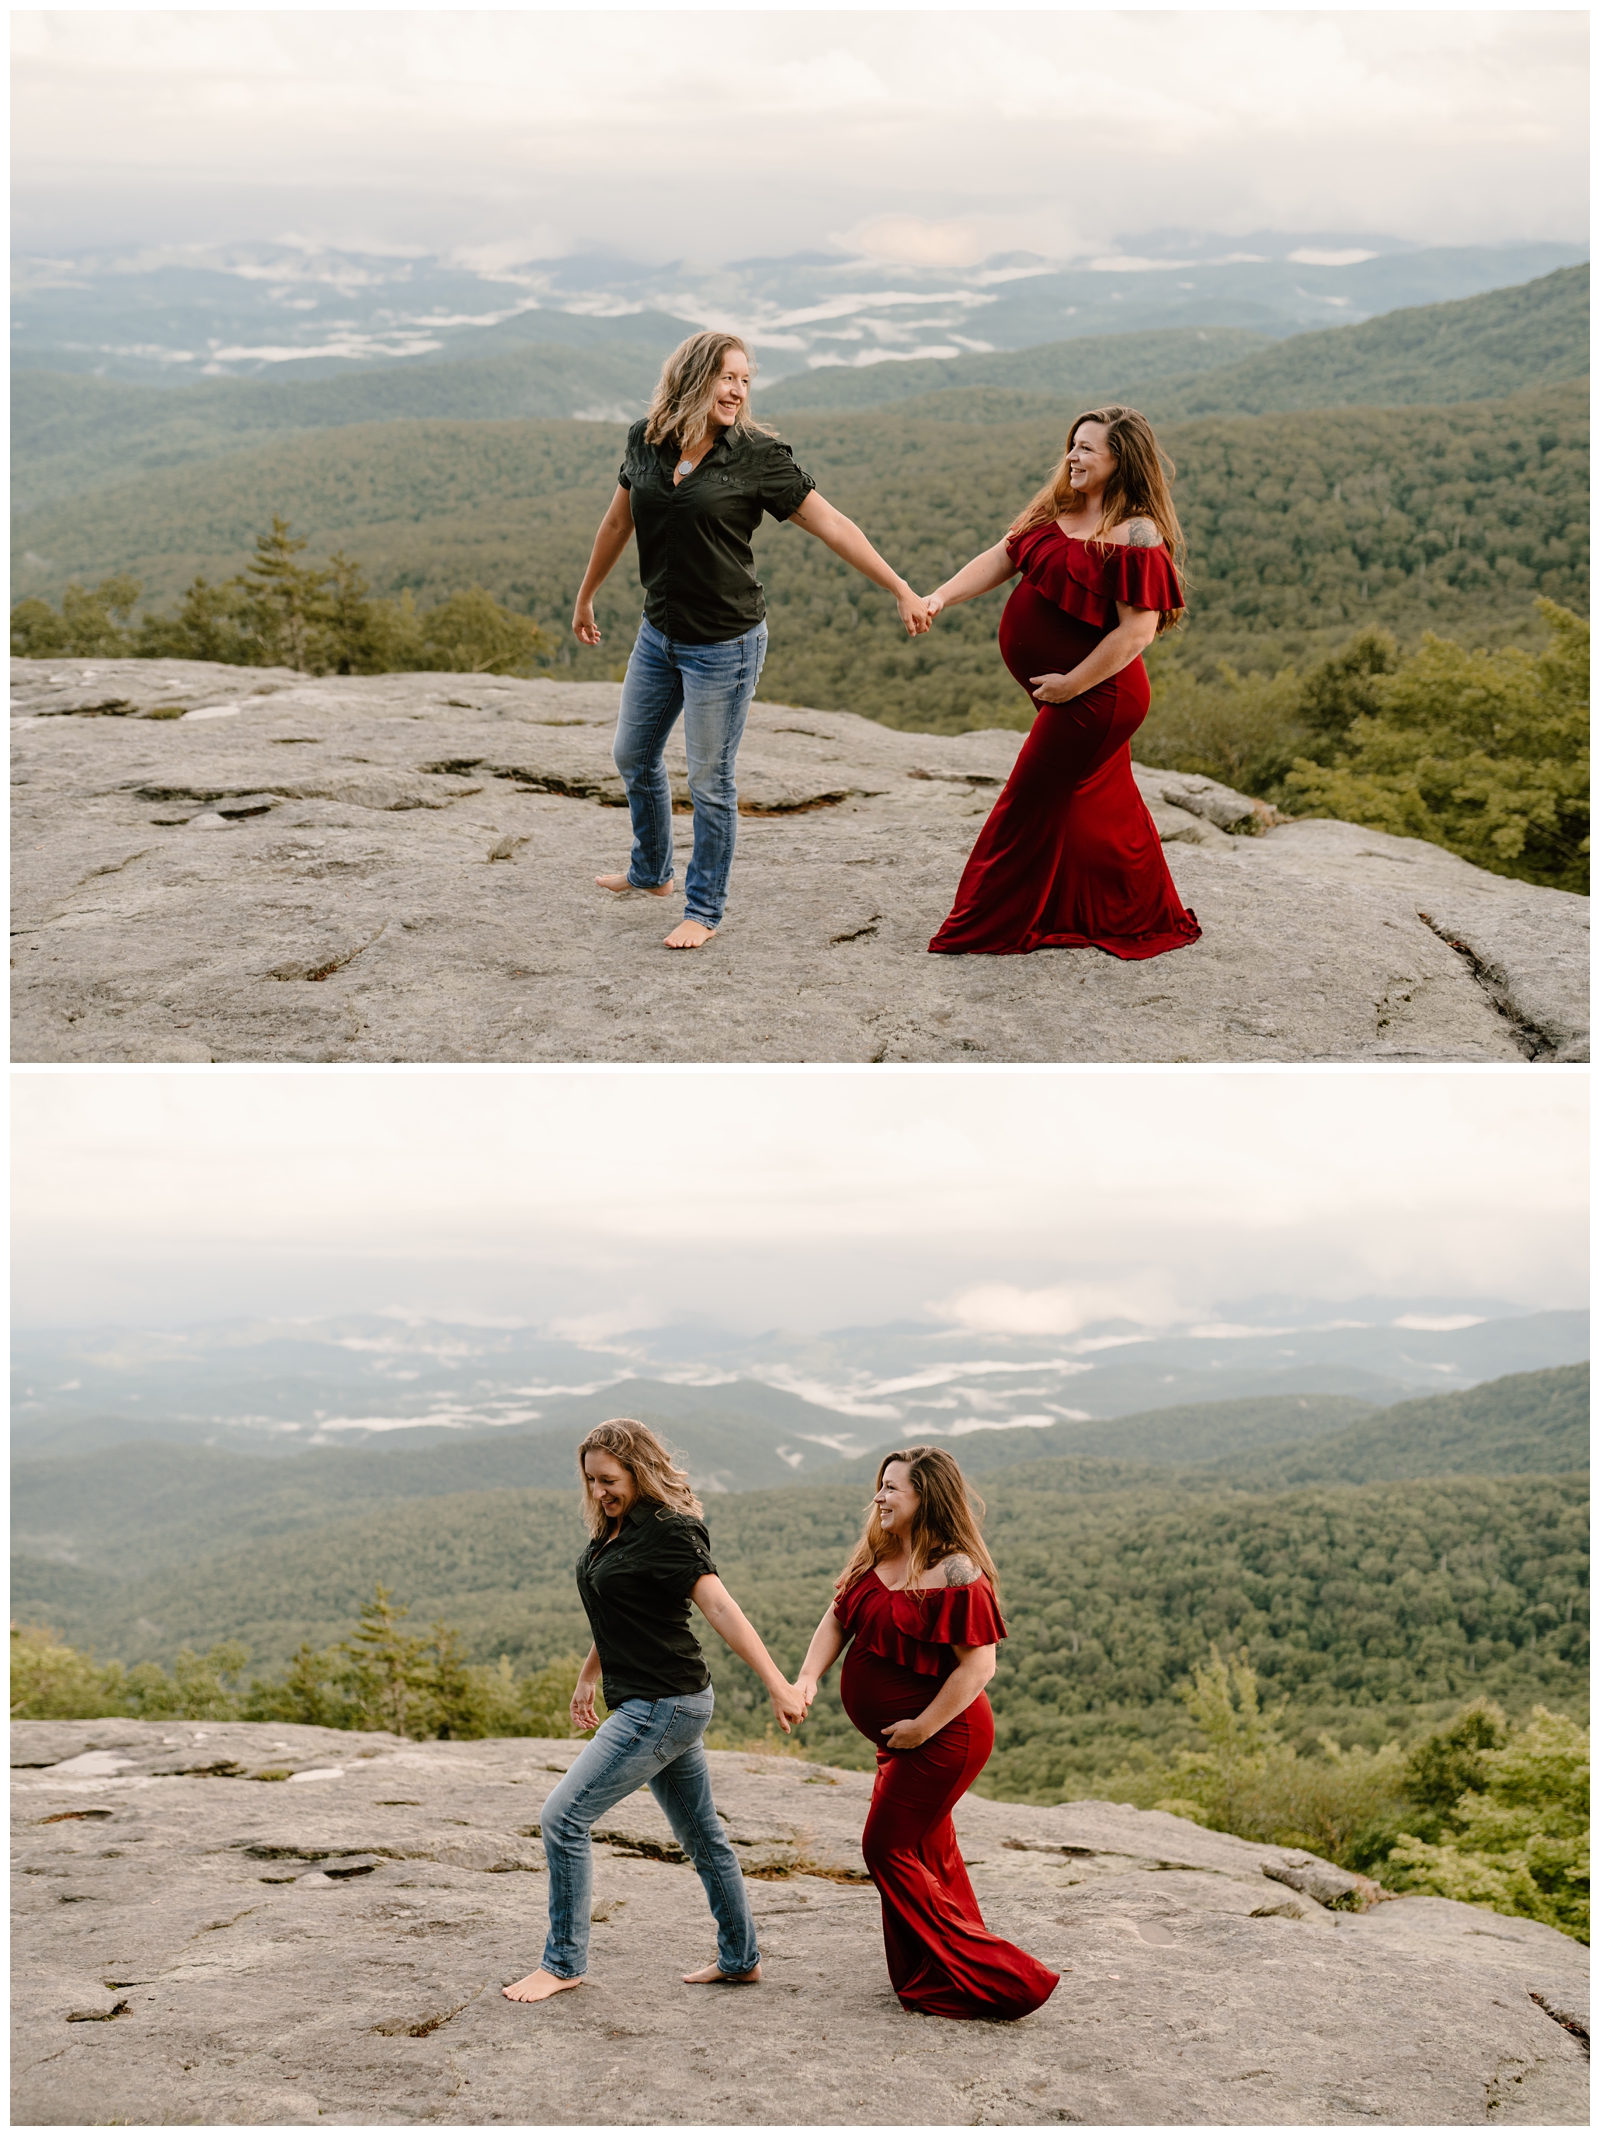 Magical mountain views maternity session along the Blue Ridge Parkway by NC photographer